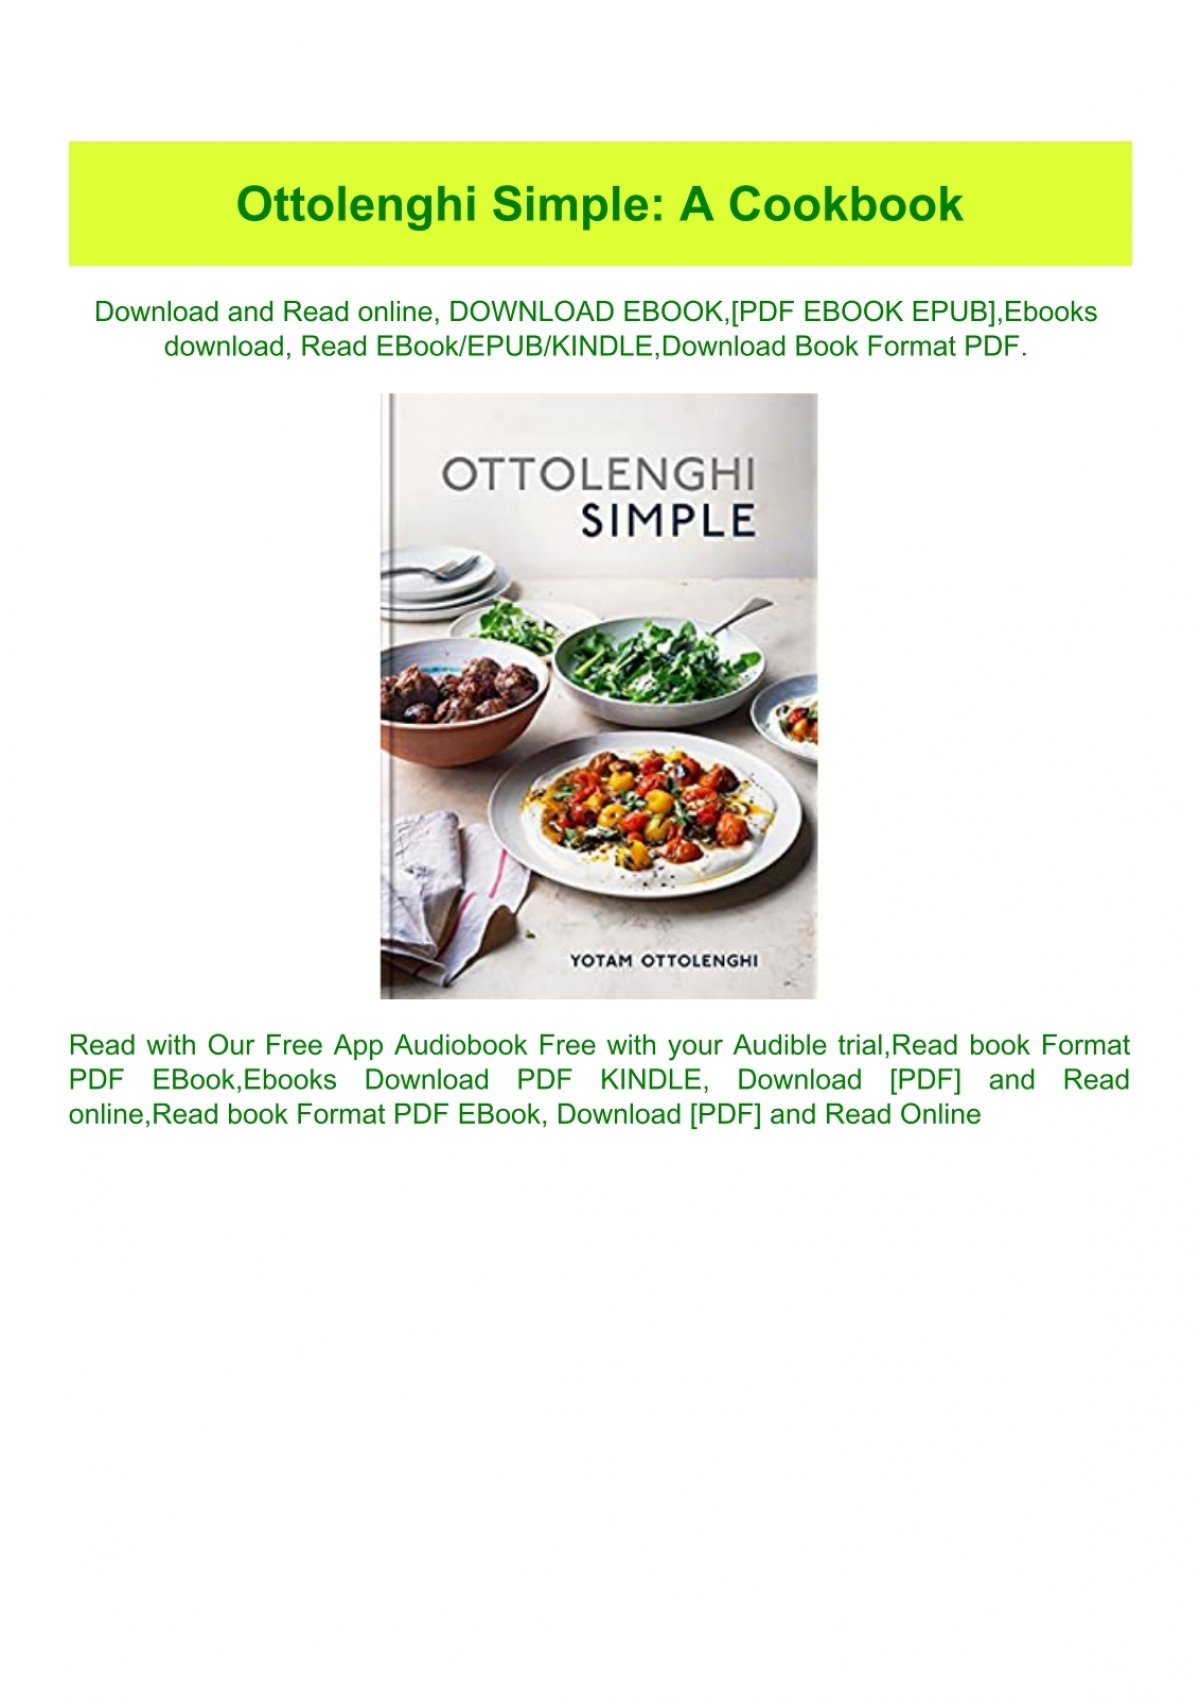 Why read Ottolenghi Simple?